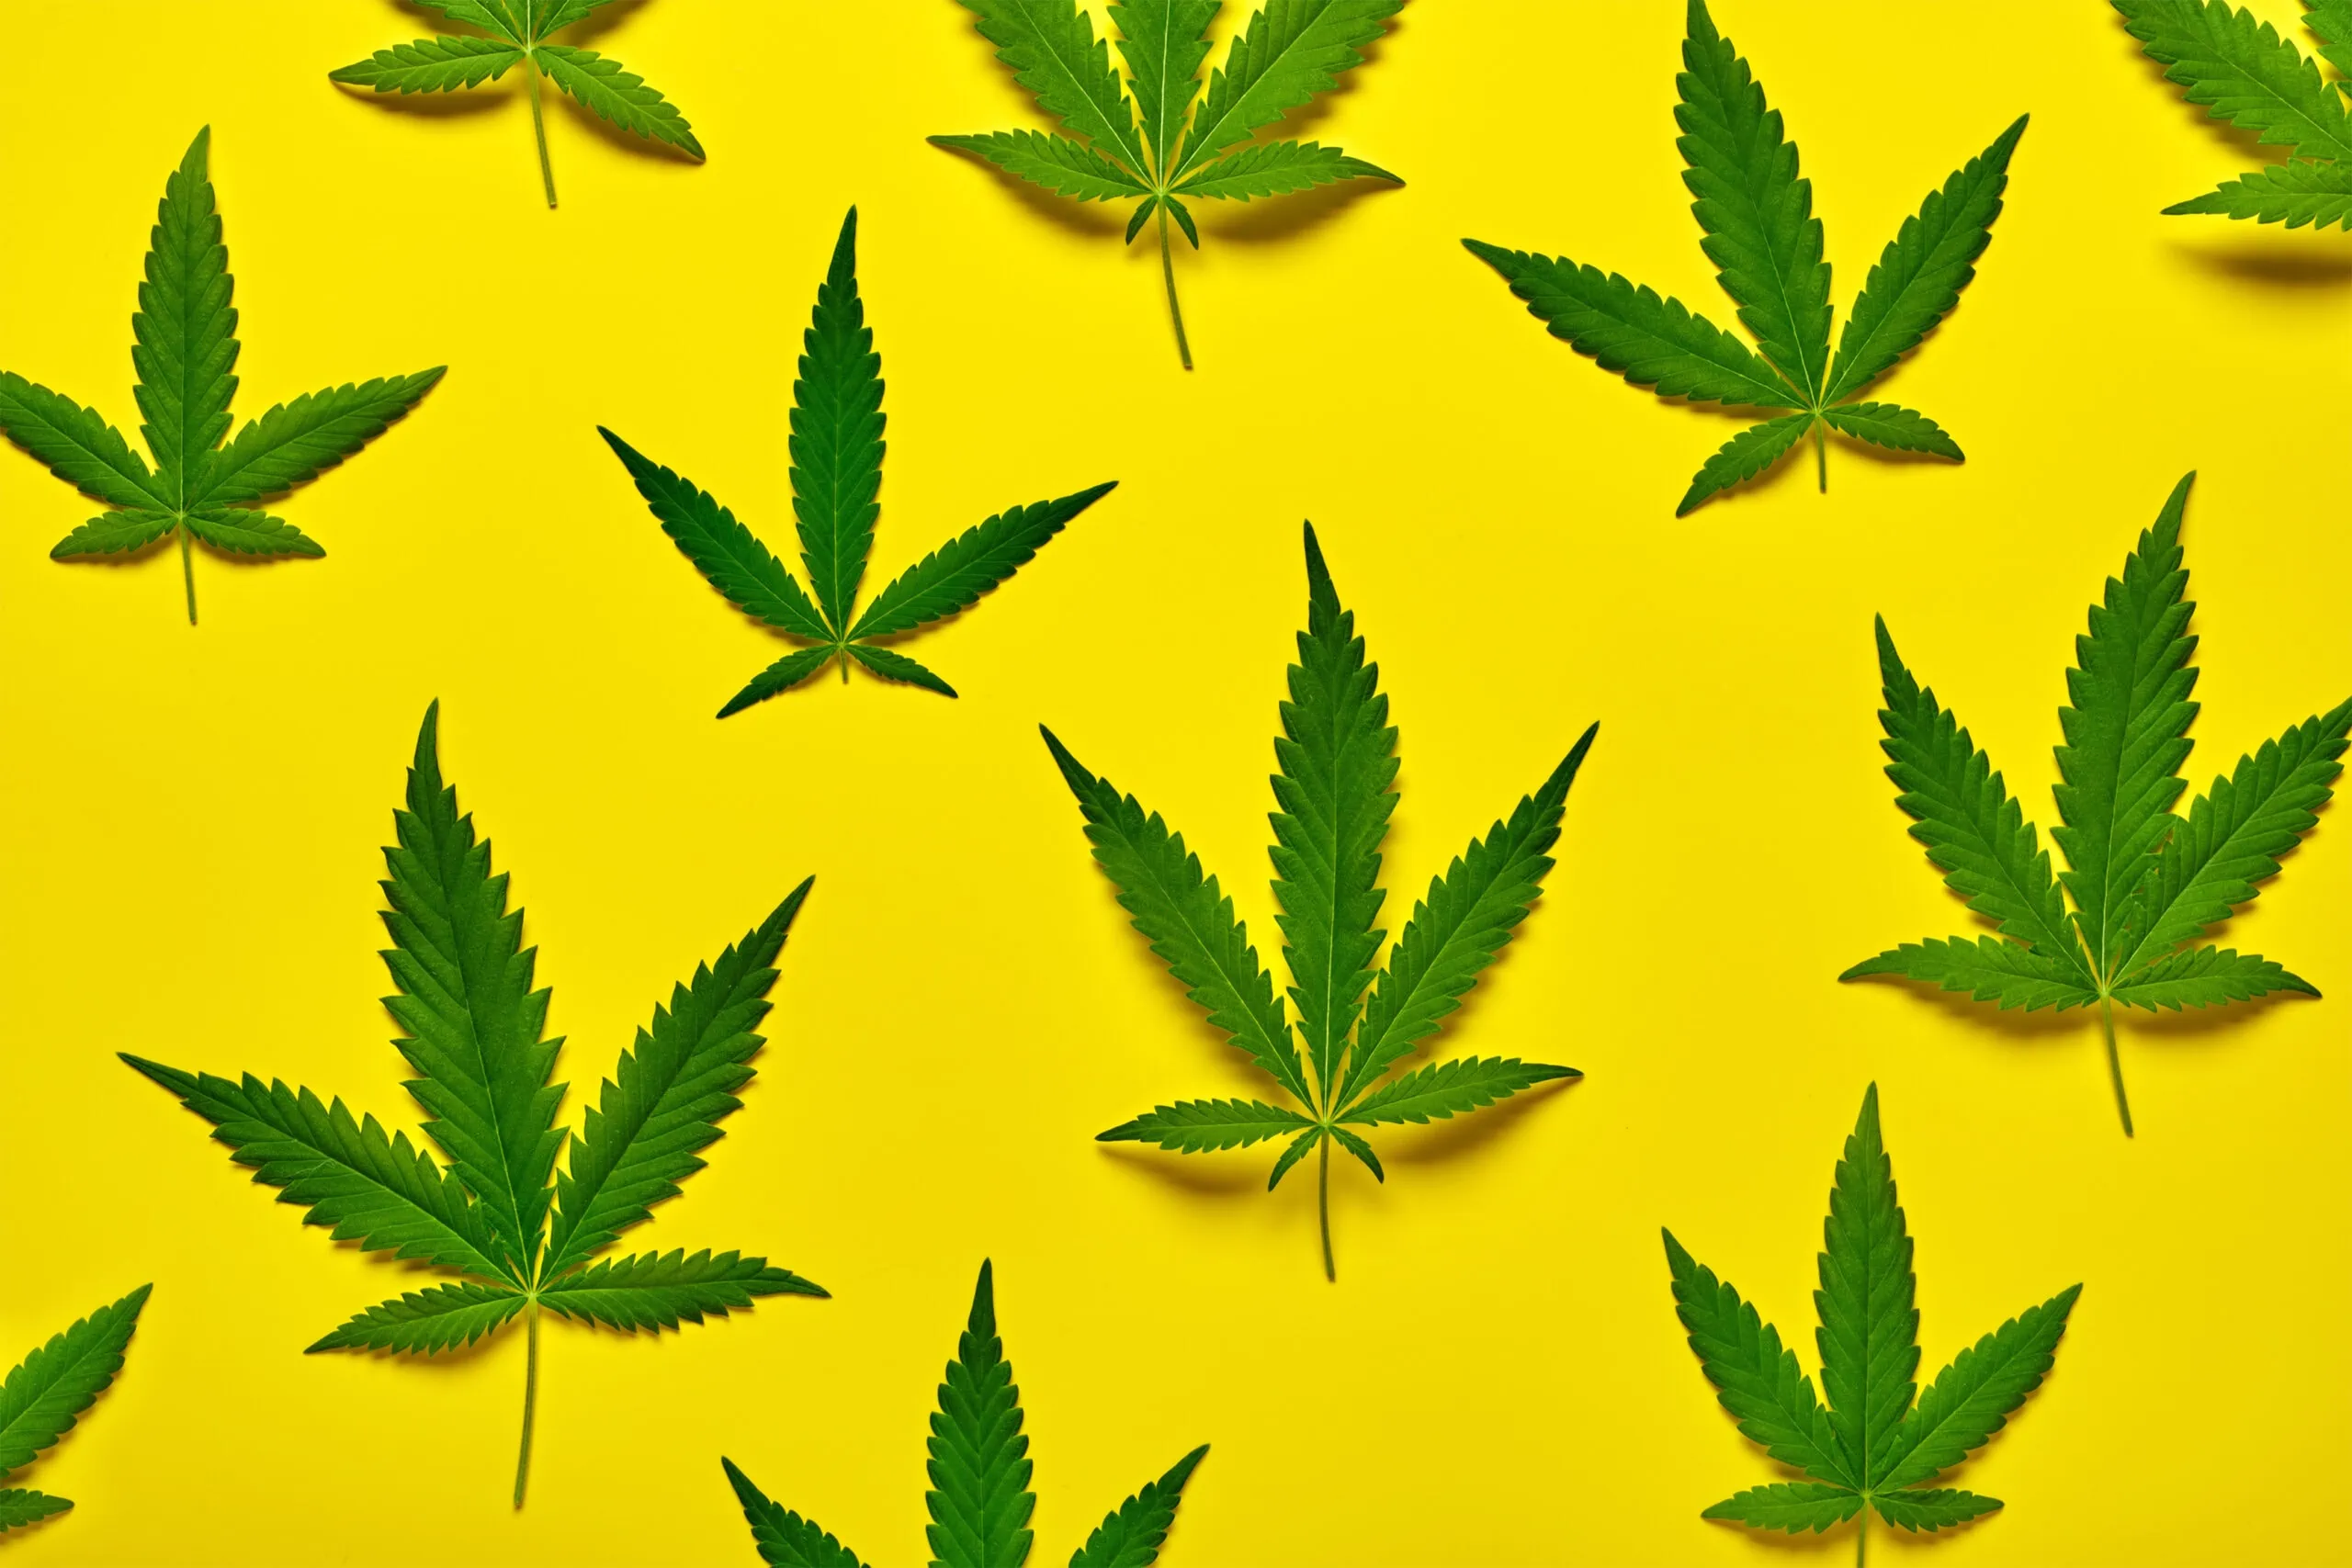 Marijuana leaves with Delta-8 THC on a yellow background.